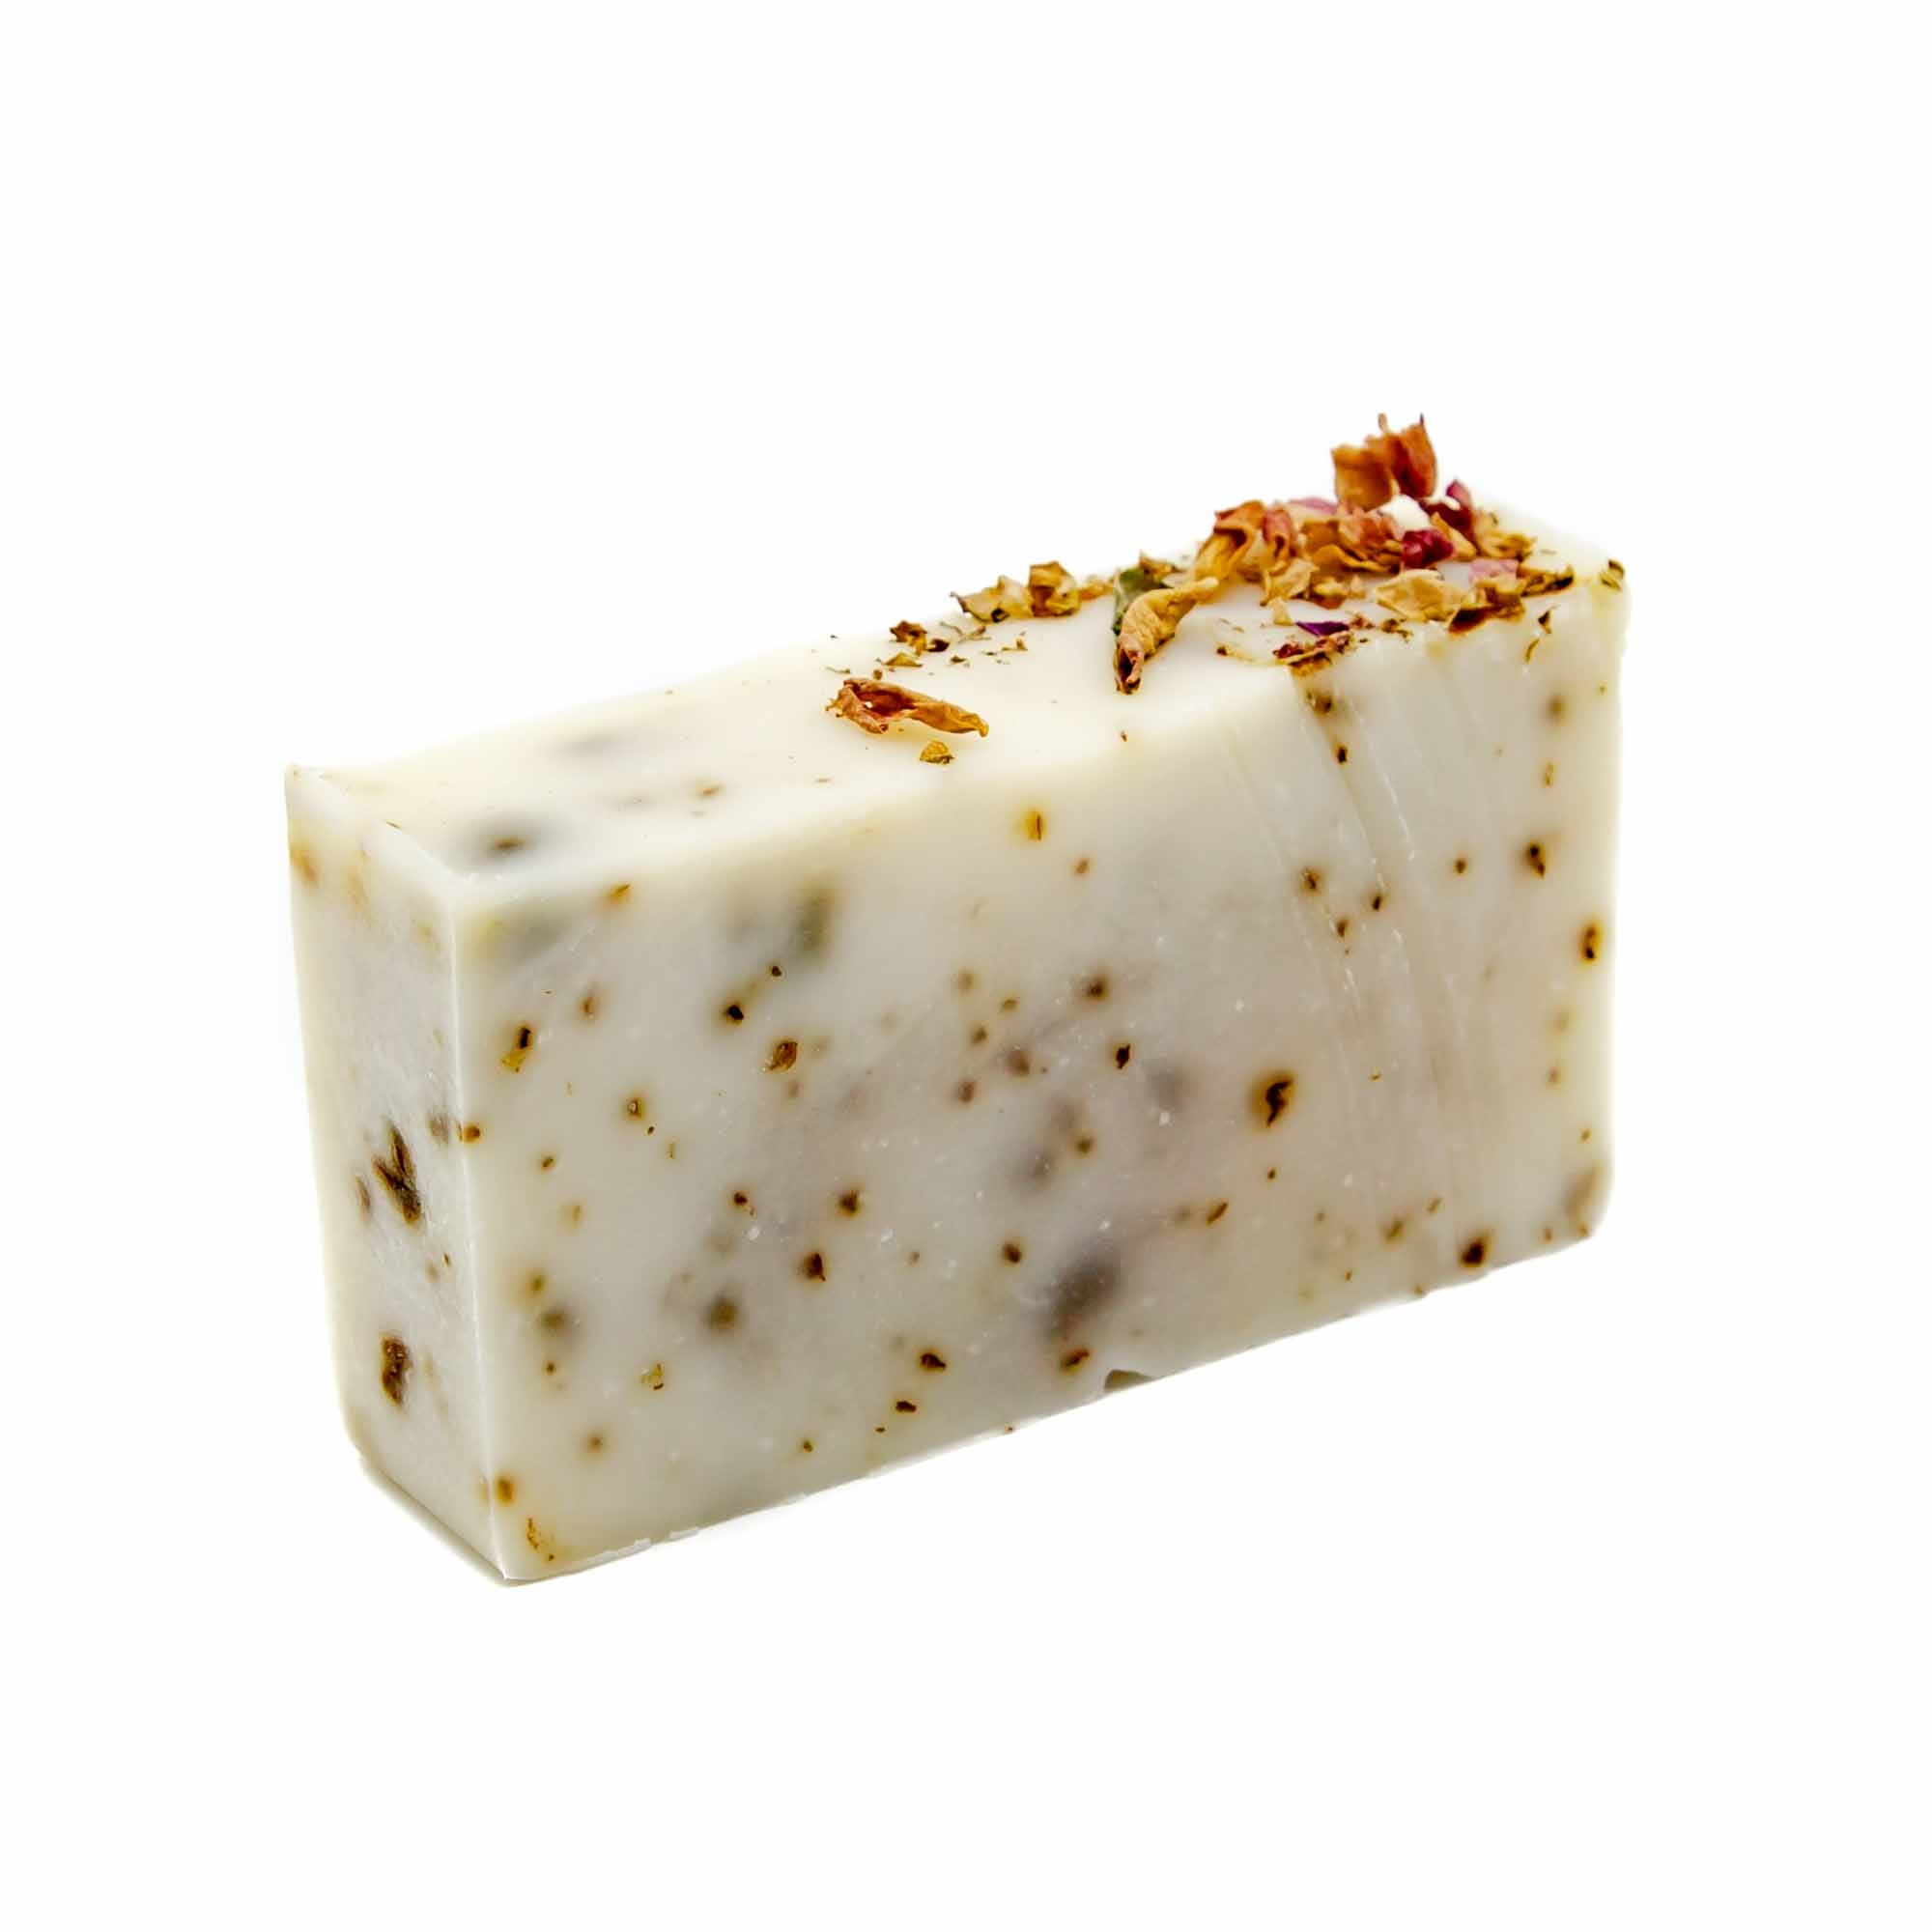 welliver goods - rosemary lavender bar soap - Mortise And Tenon